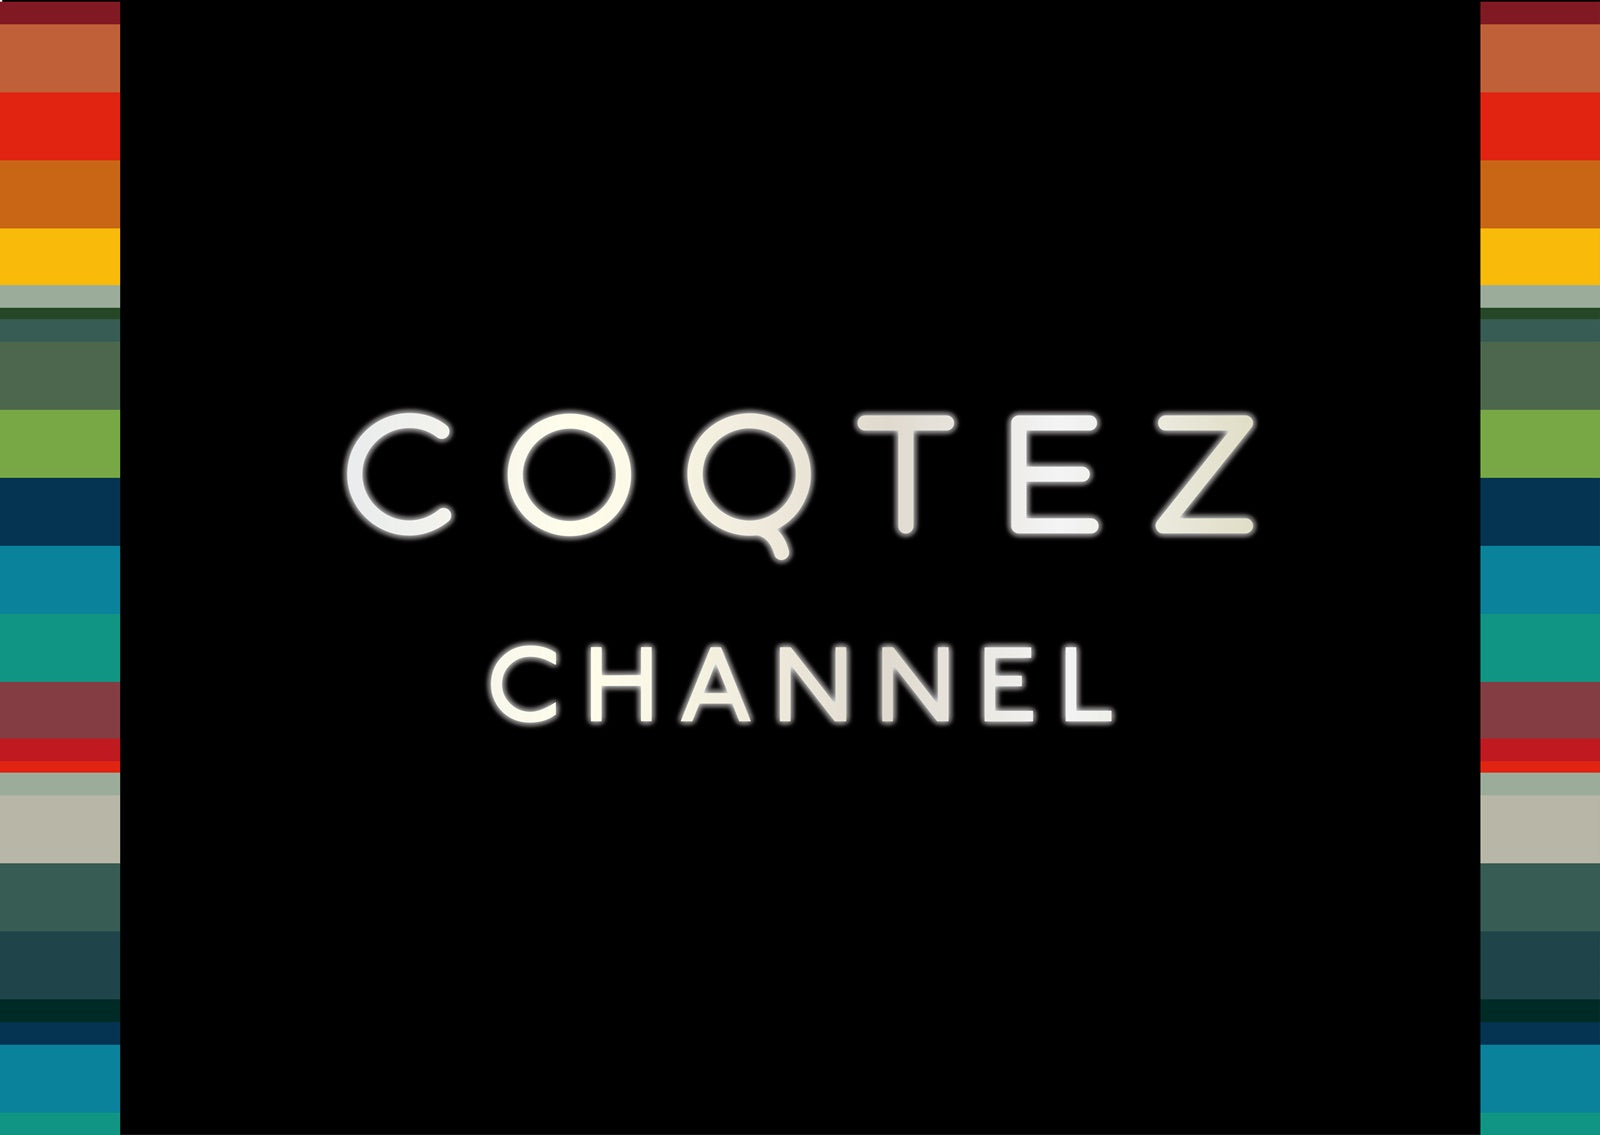 Load video: COQTEZ Channel 始まりました！